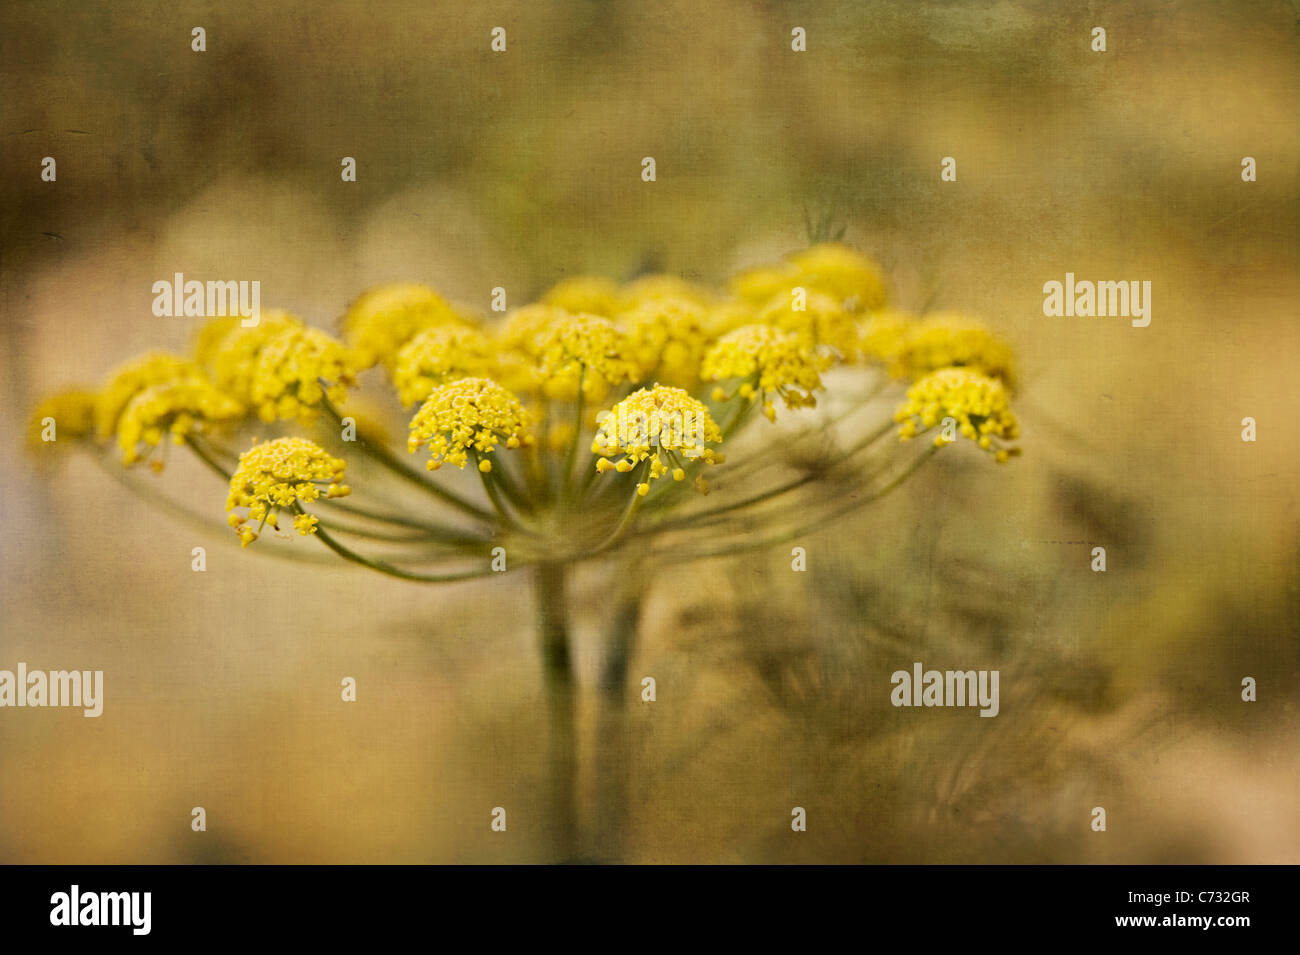 Close-up image of the summer flowering, yellow Foeniculum vulgare flowers also known as Common Fennel, image taken against a soft background. Stock Photo